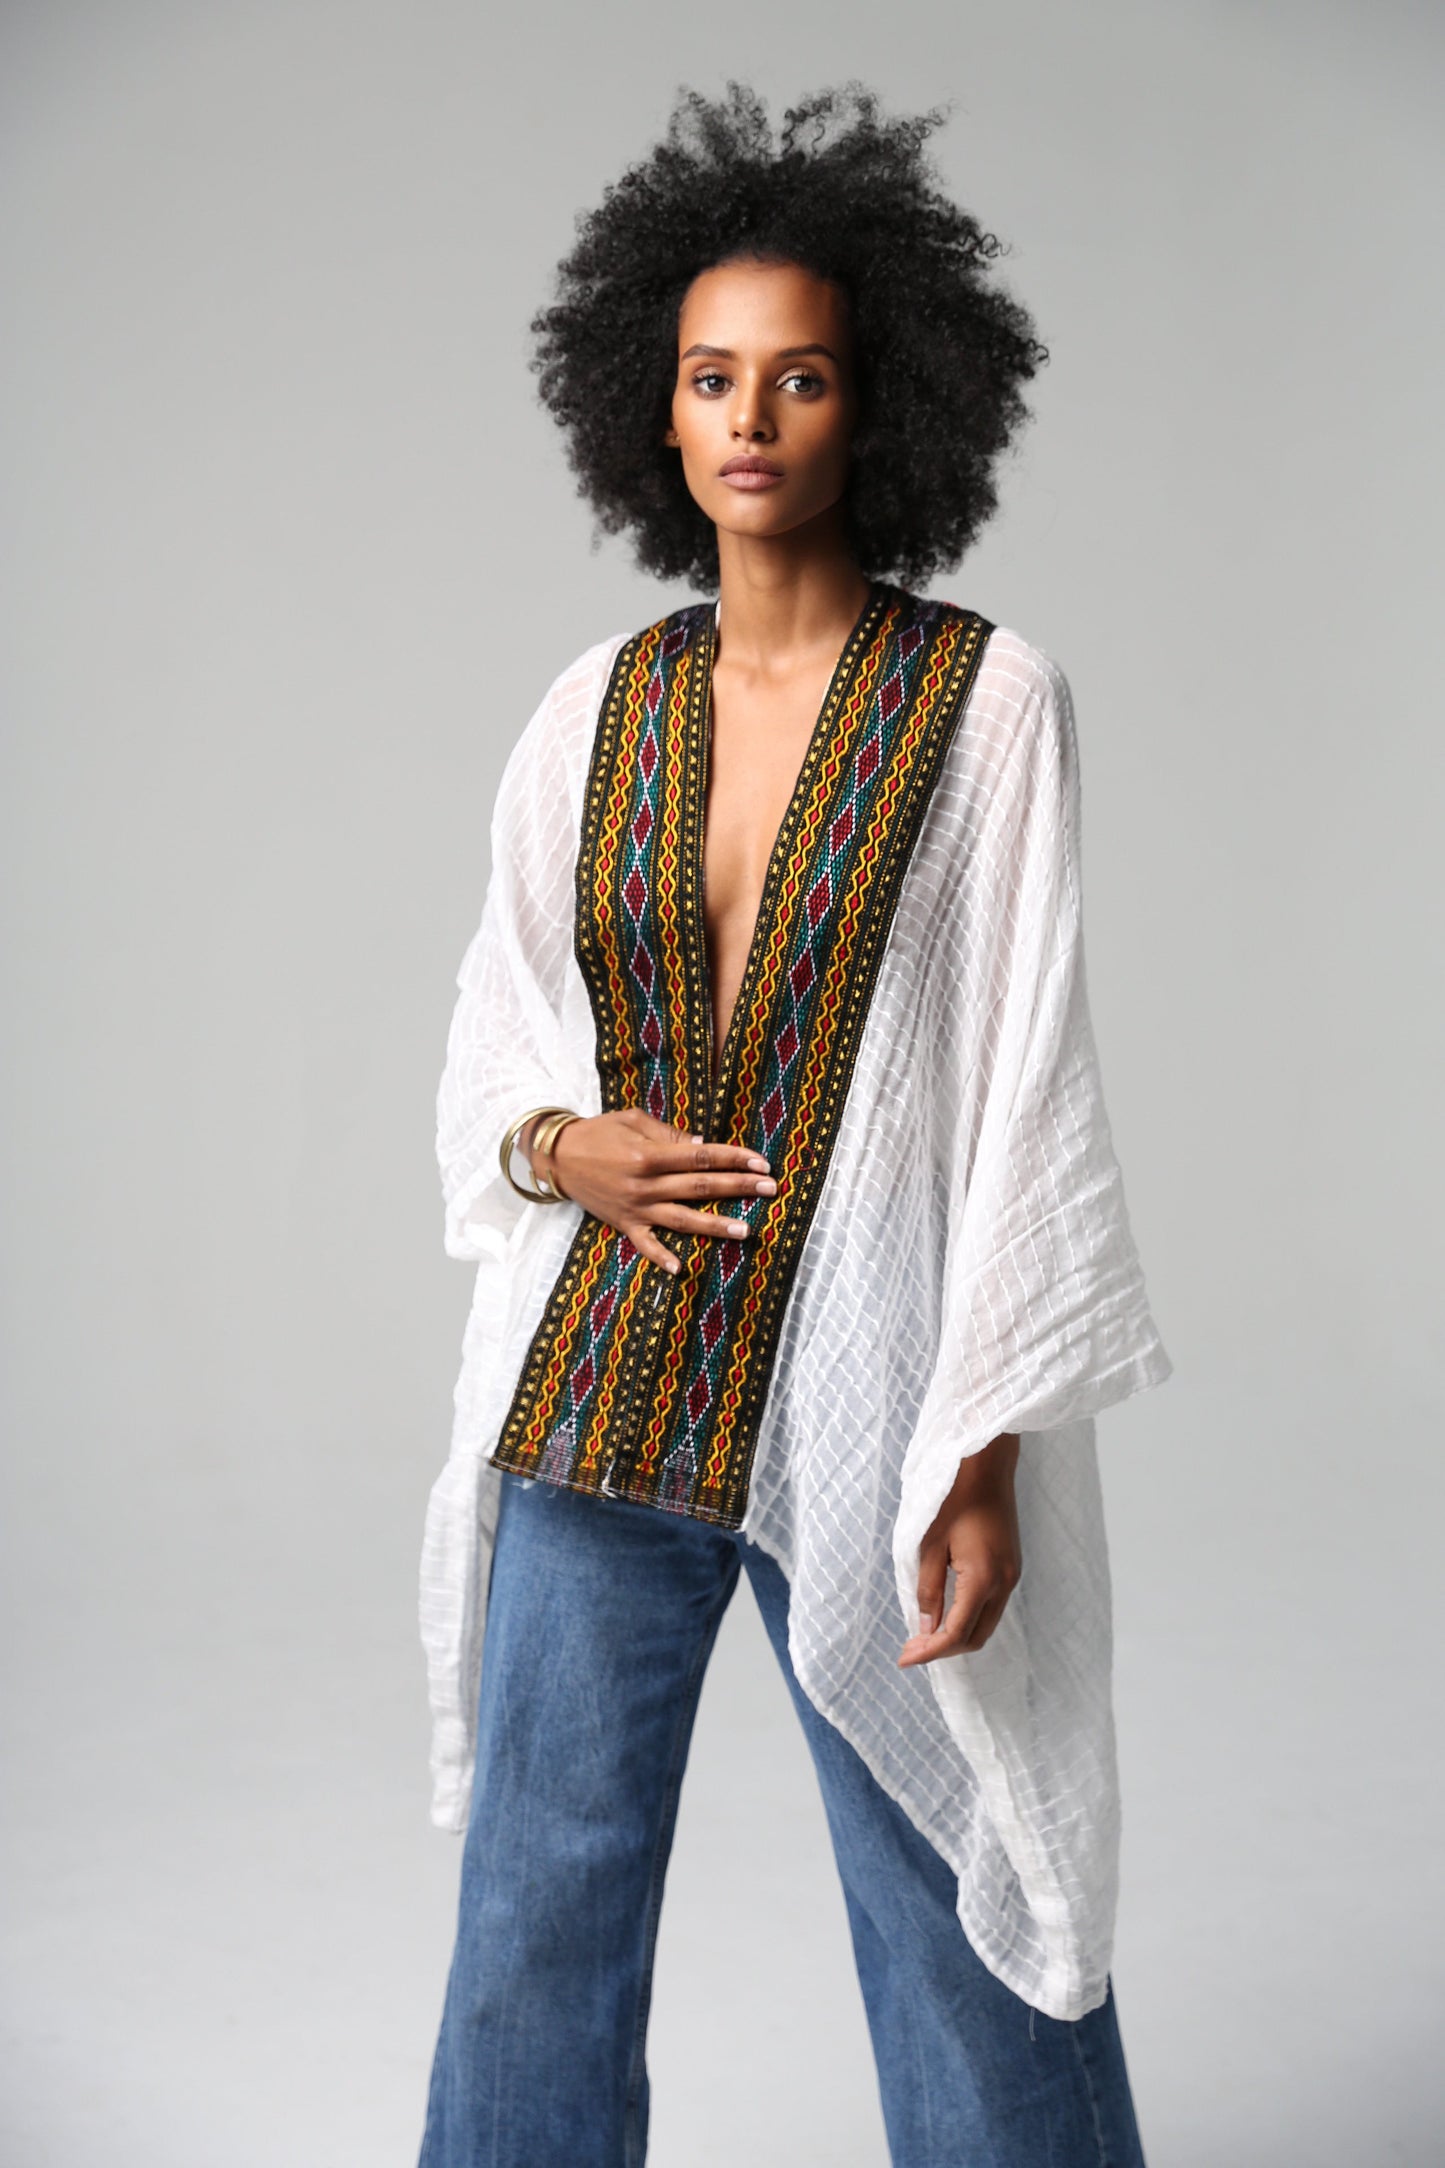 
                  
                    Our Firely Cardigan is handwoven using traditionally embroidering techniques and we contemporized it for every wear. Perfect for this spring/summer with jeans and a top, or a dress. Made it stylishly so you can always be effortlessly chic and in style. #ss22  meronmamo handwoven handcrafted Handmade sustainablefashion qualityafricanclothing adeyabebaofficial adeyabeba mmeron3 Shamayim firelycardigan slowfashion
                  
                